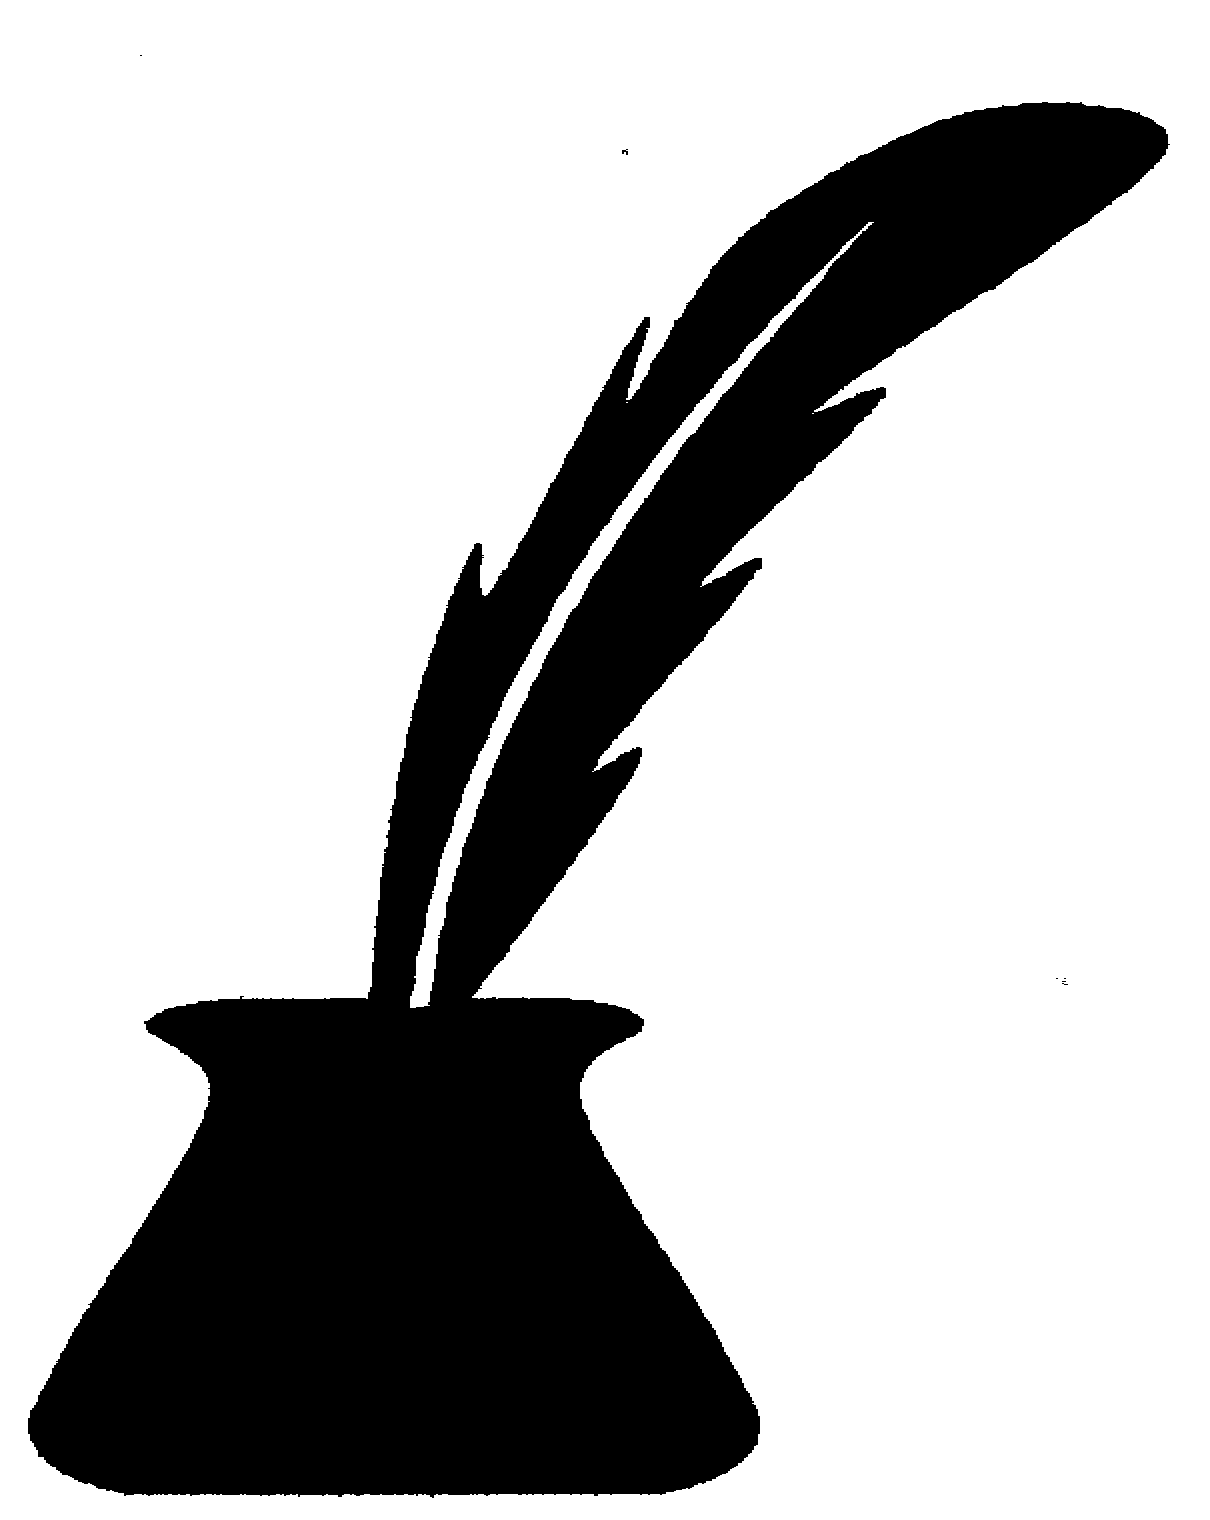 Download Feather Pen Image Image HD Photo Clipart PNG Free